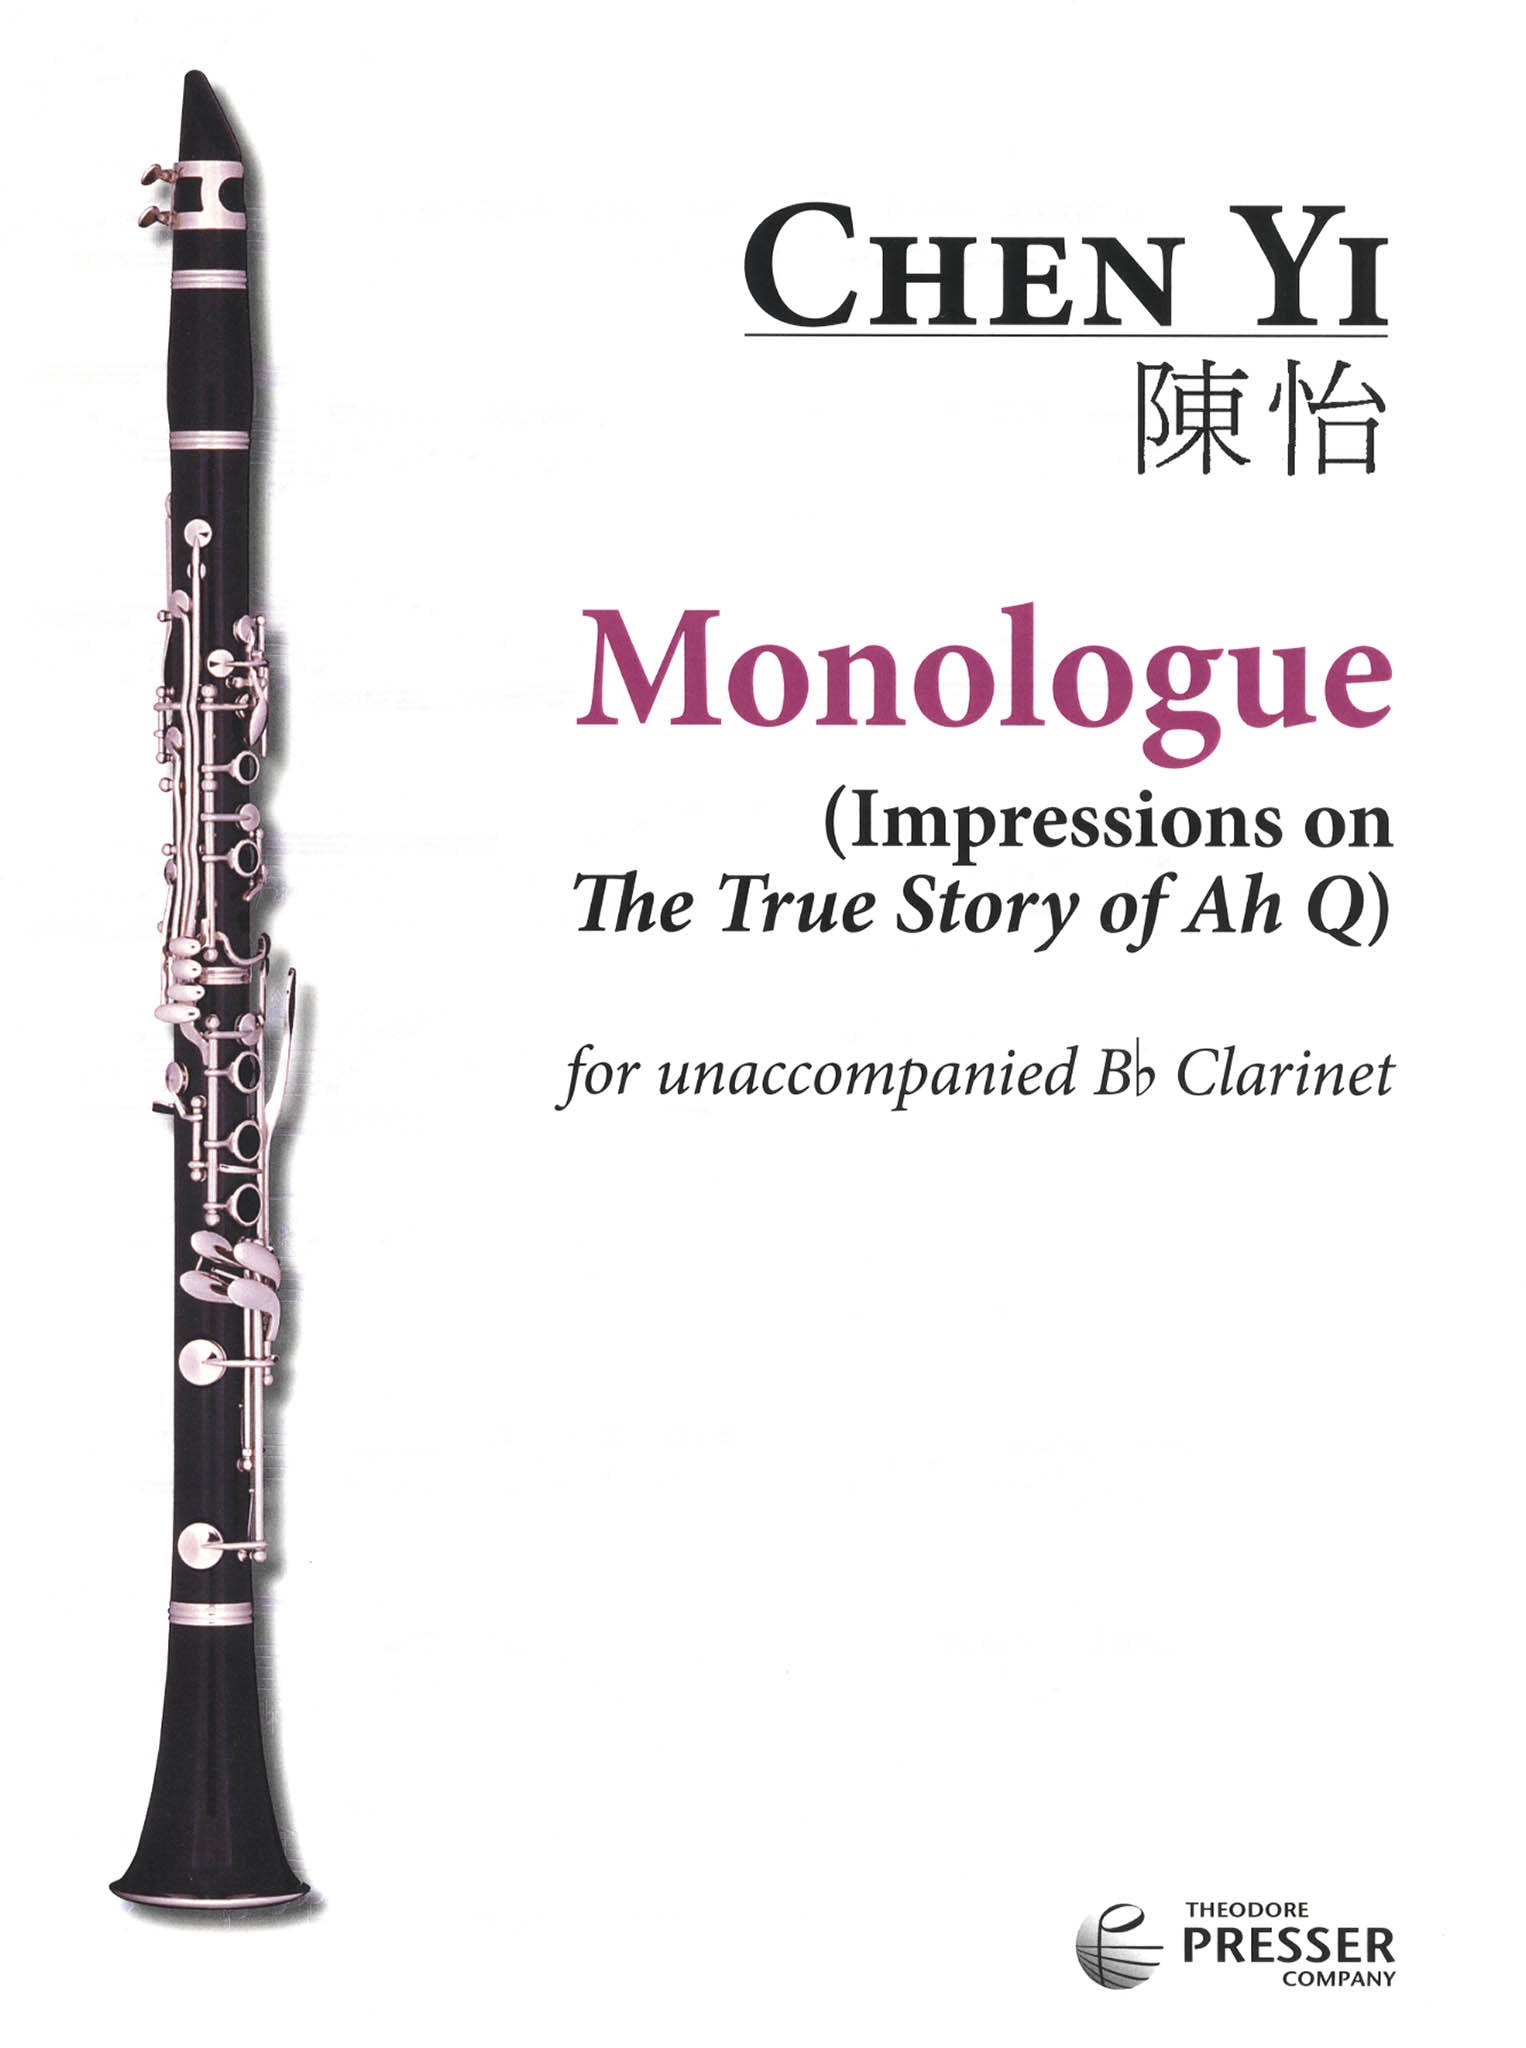 Chen Yi Monologue (Impressions on The True Story of Ah Q) unaccompanied clarinet cover